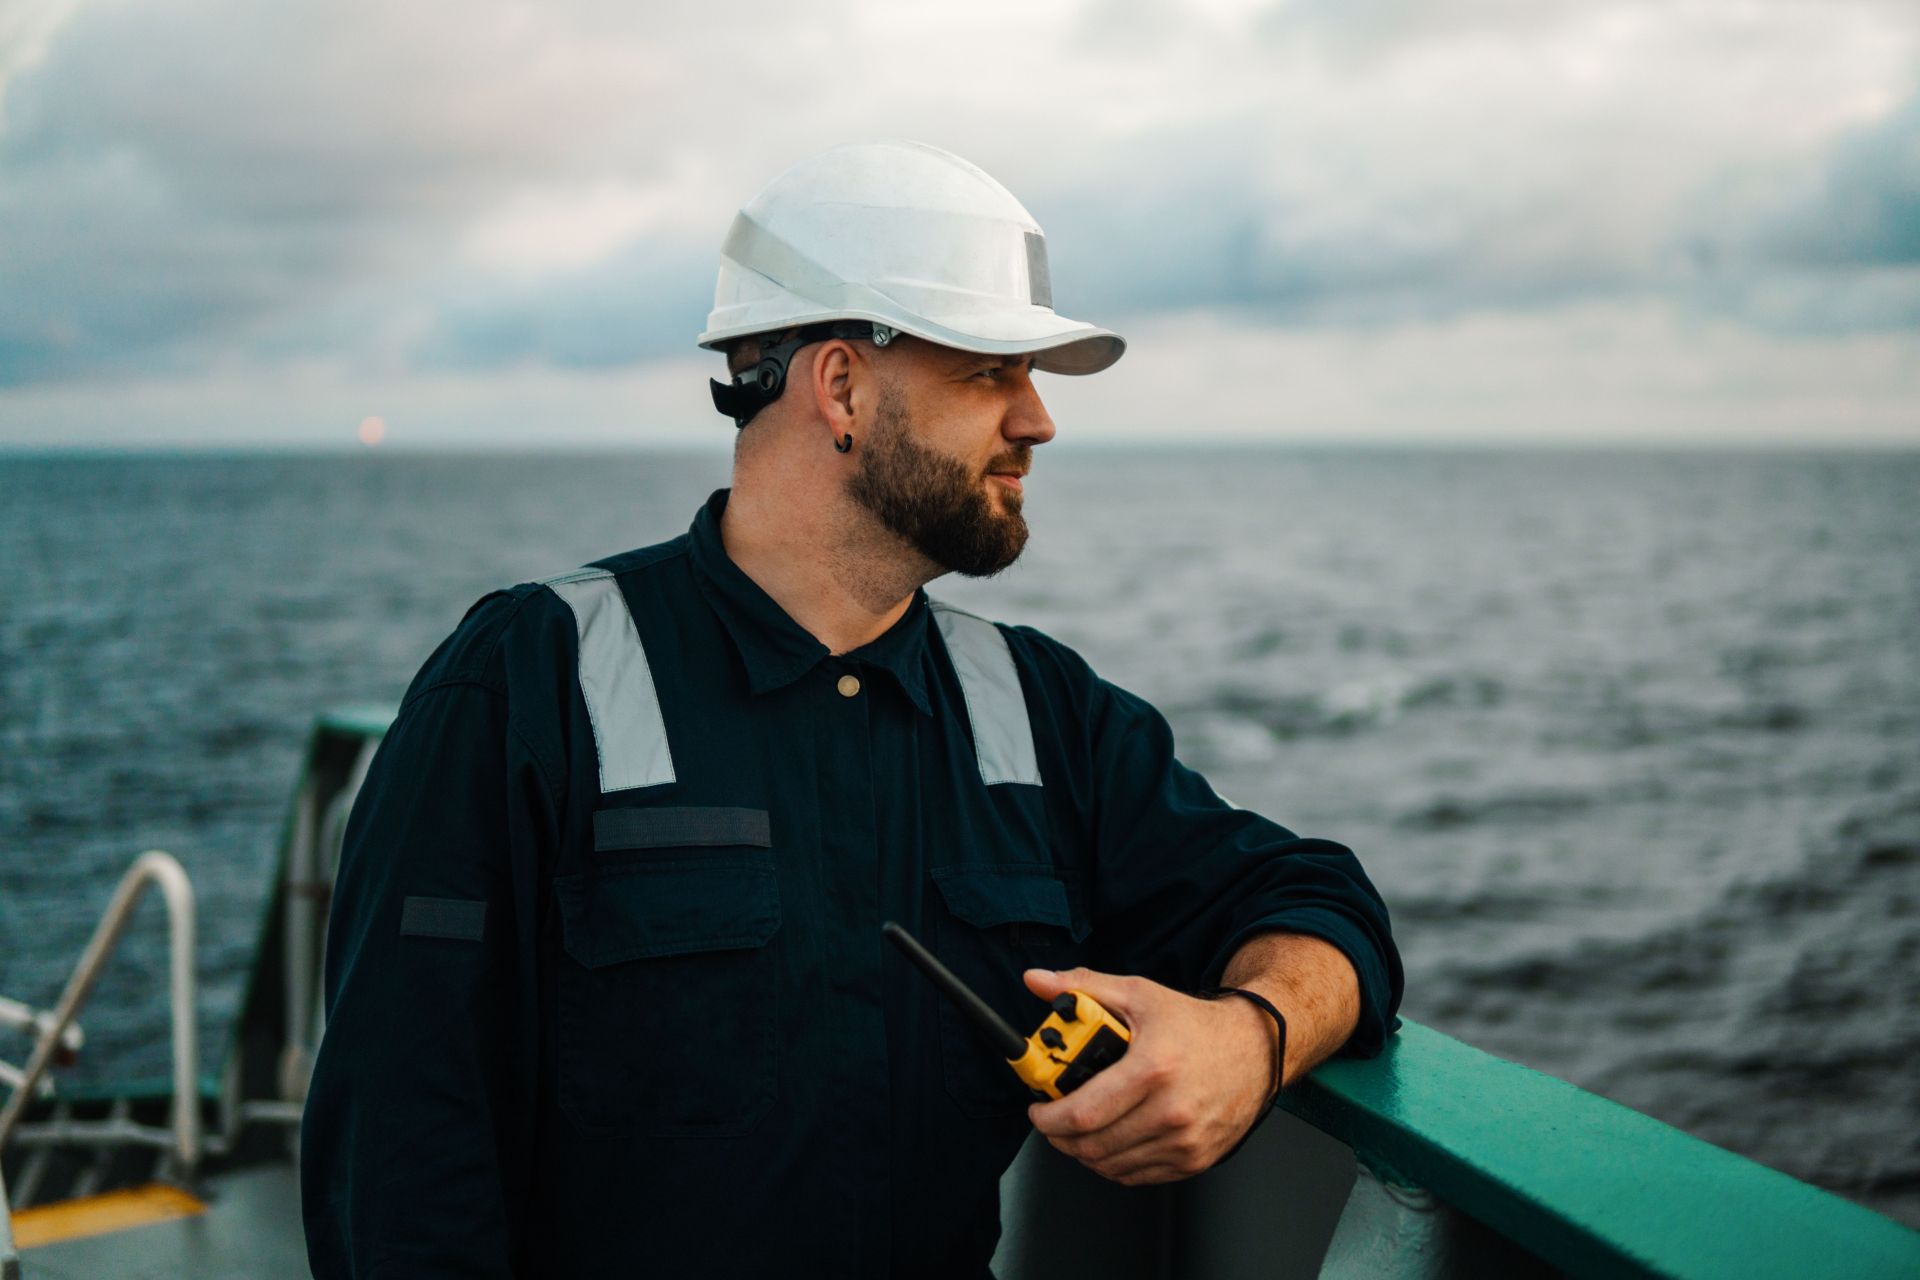 Maritime professional with a hard hat and walkie-talkie looking out at sea, standing by the ship's railing at sunset.